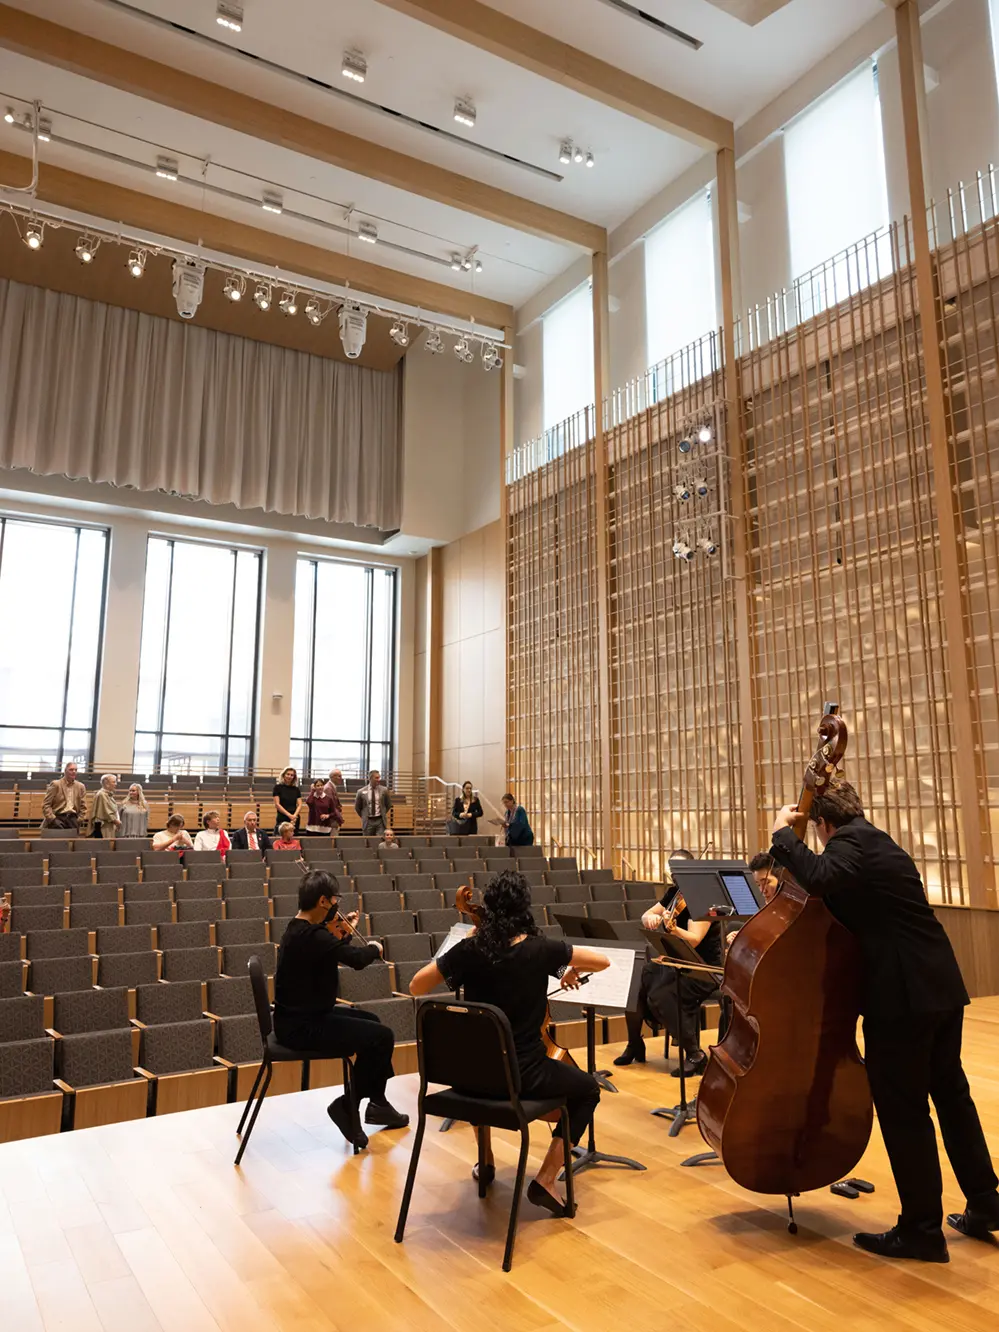 Seen from behind, five musicians play stringed instruments in a recital hall with mostly empty seats. The ceiling is very high, windows let in natural light and the acoustic treatment of the walls looks like modern art.